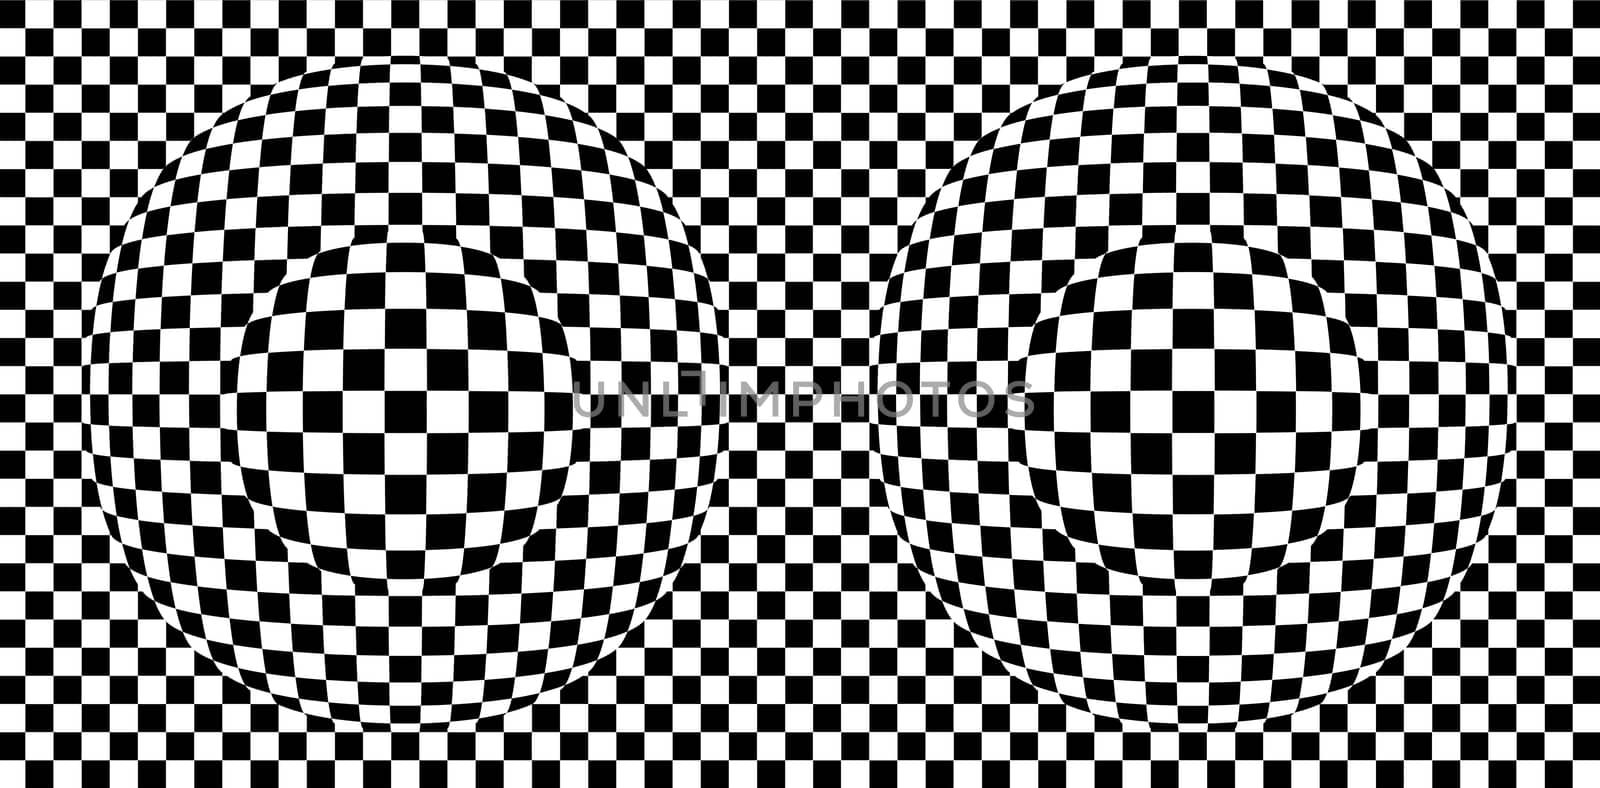 checkered texture  with 2 spheres 3d background  made in 3d software